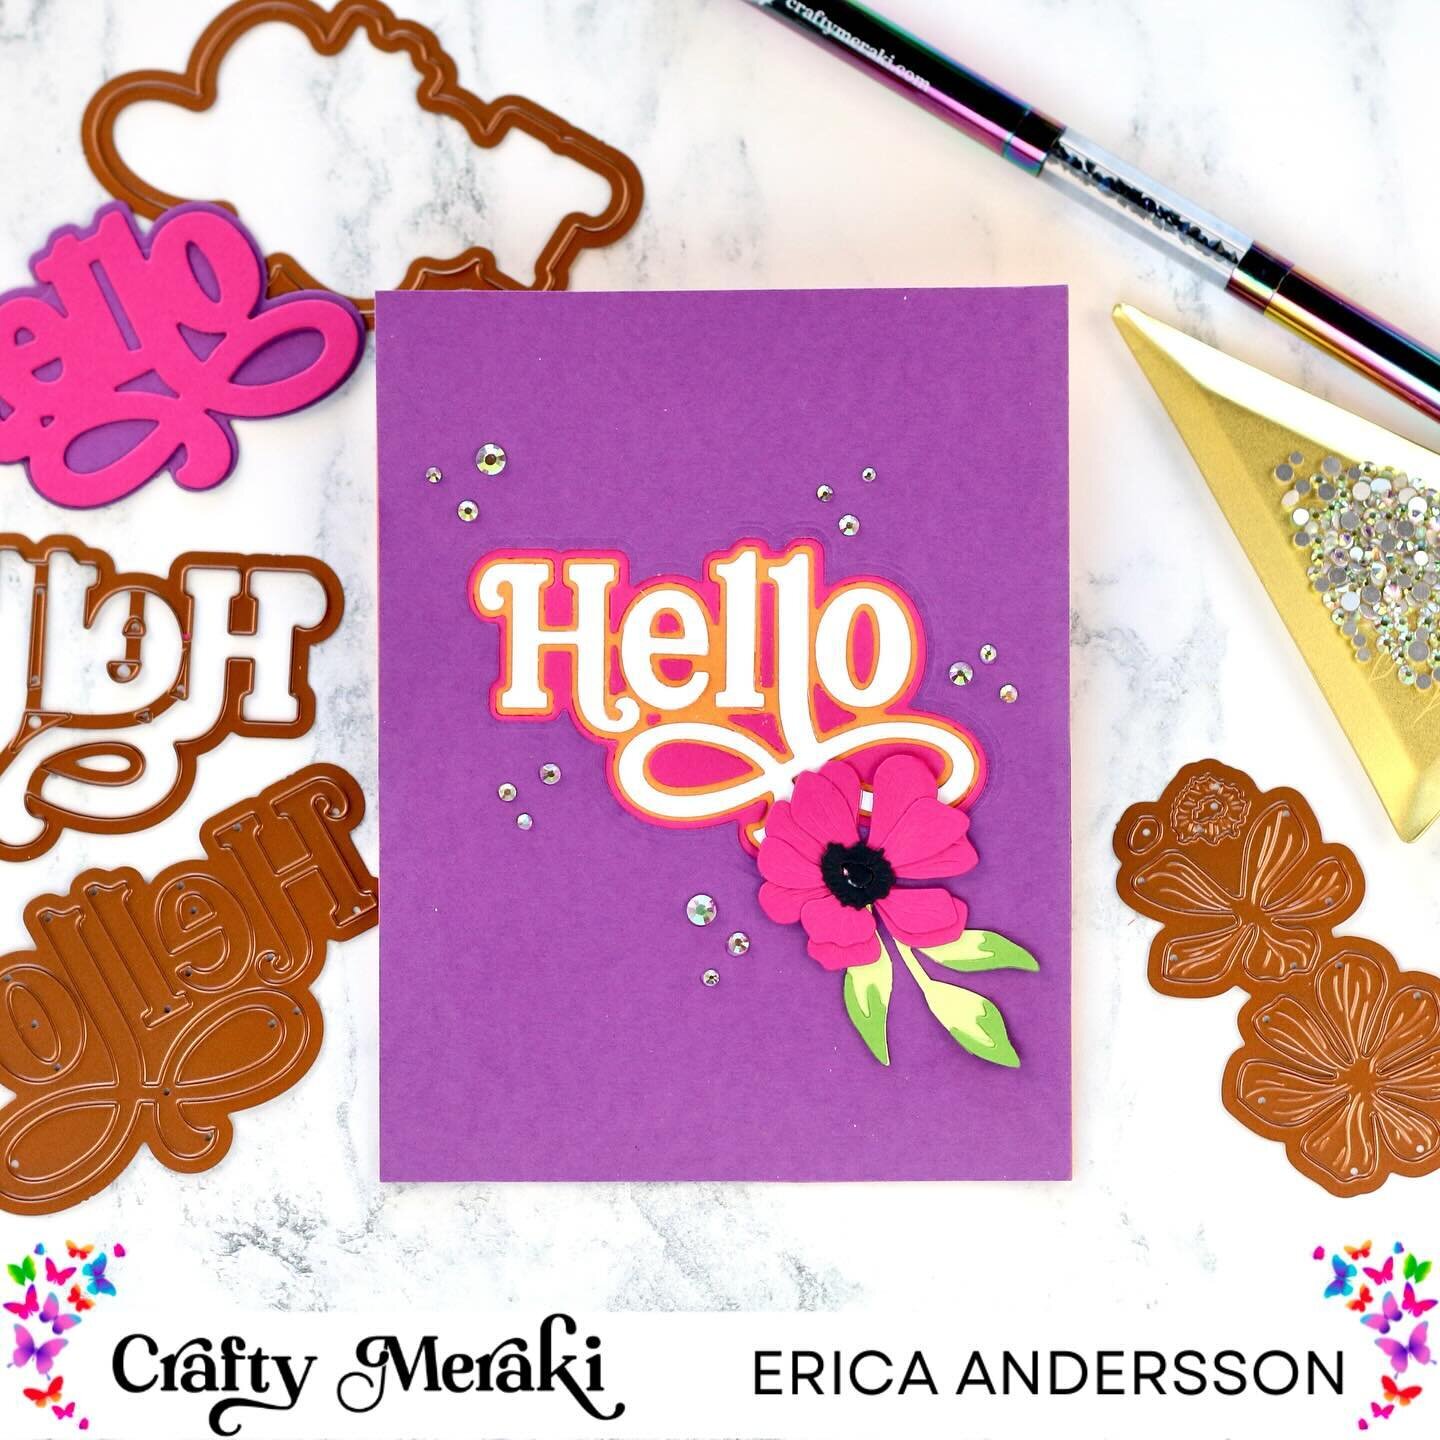 🌸✨ Get ready to fall in love with crafting all over again with Crafty Meraki&rsquo;s #MerakiHugs New Release! 🎉 
Experience the ultimate crafting joy as we introduce a delightful twist to sentiments and unveil stunning new layering floral dies - a 